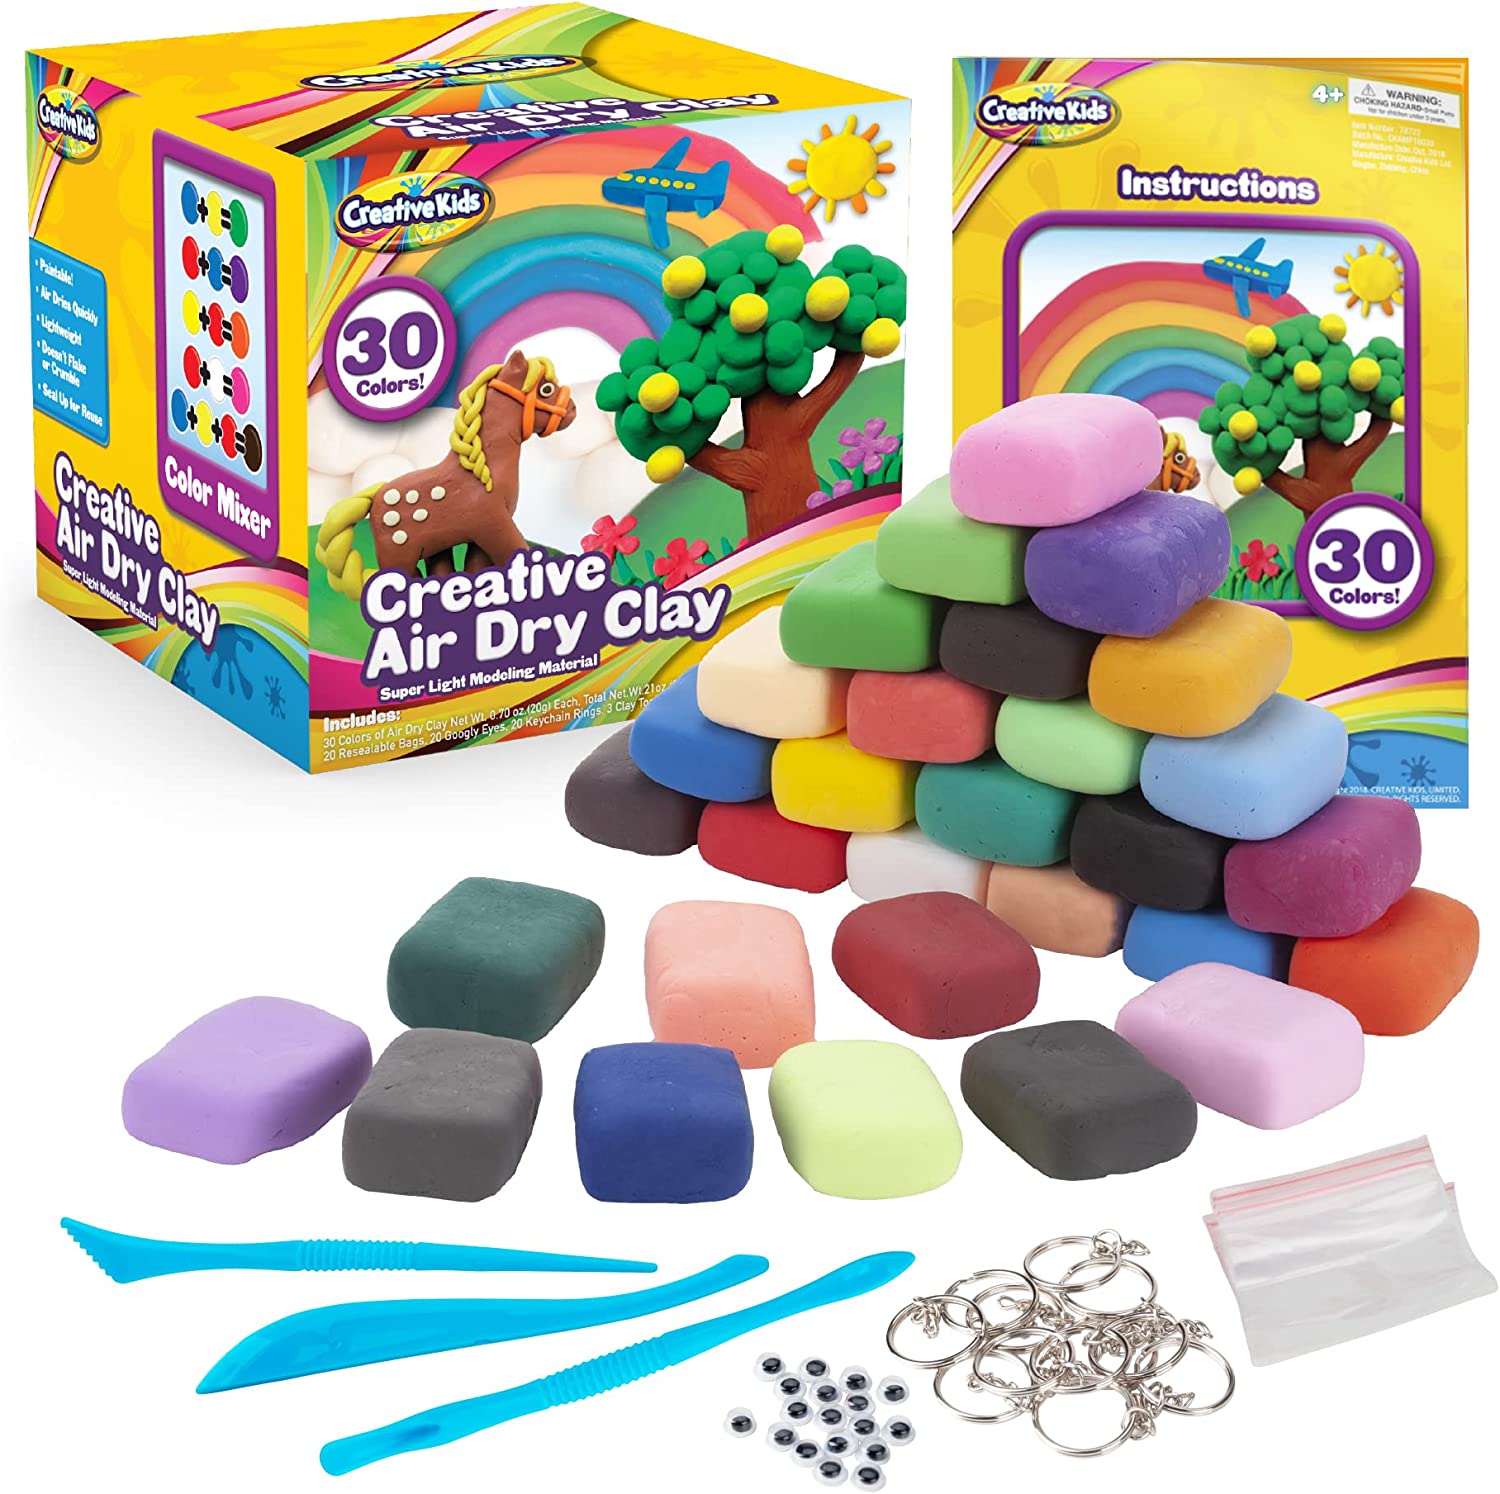 ifergoo Modeling Clay, 24/36 Colors Air Dry Clay Best Gift for Kids, Super  Light Magic Clay with Sculpting Tools and Project, No-Sticky and Non-Toxic